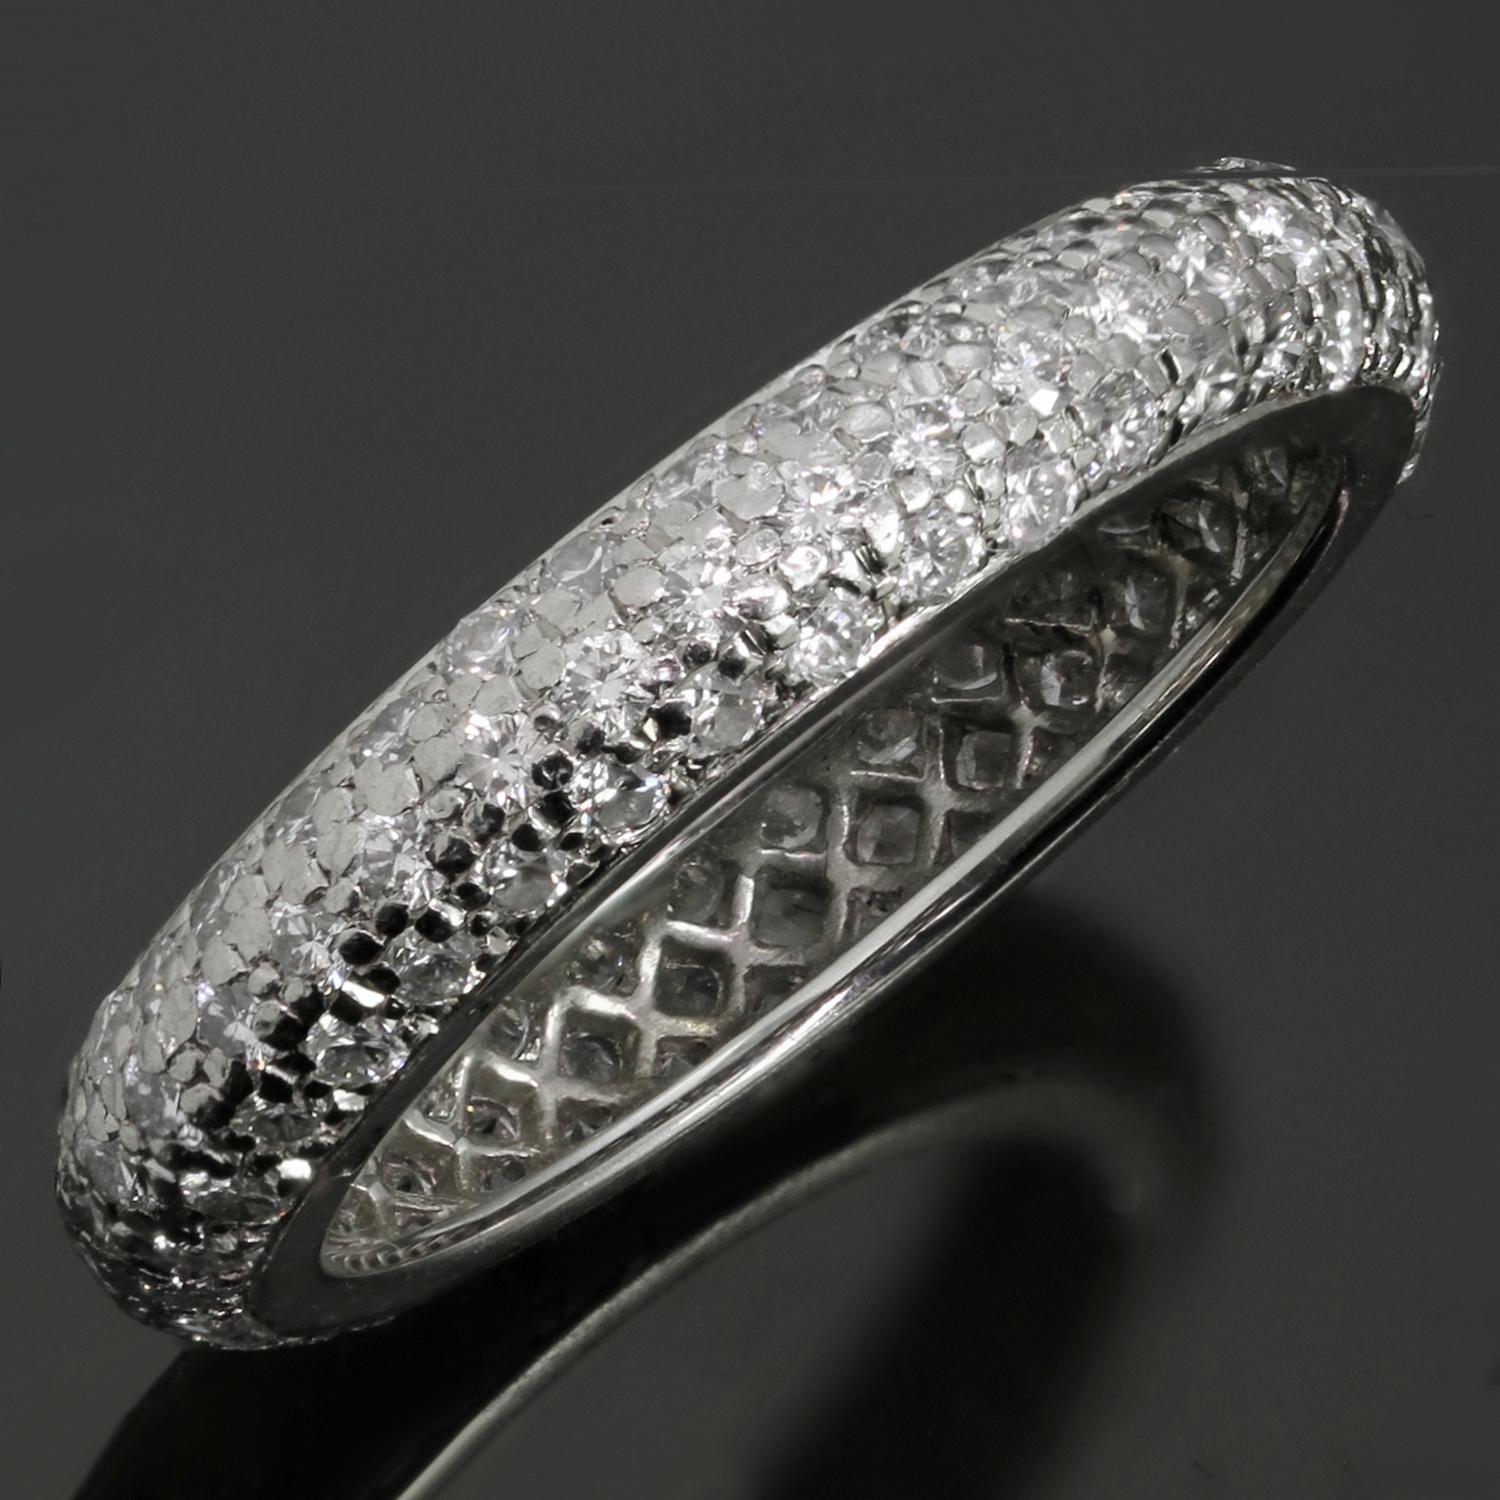 This classic Cartier dome-shaped wedding is made in fine platinum and pave-set with brilliant-cut round E-F-G VVS1-VVS2 diamonds weighing an estimated 1.30 carats. A timeless design and a comfortable fit for every day elegance. Made in France circa